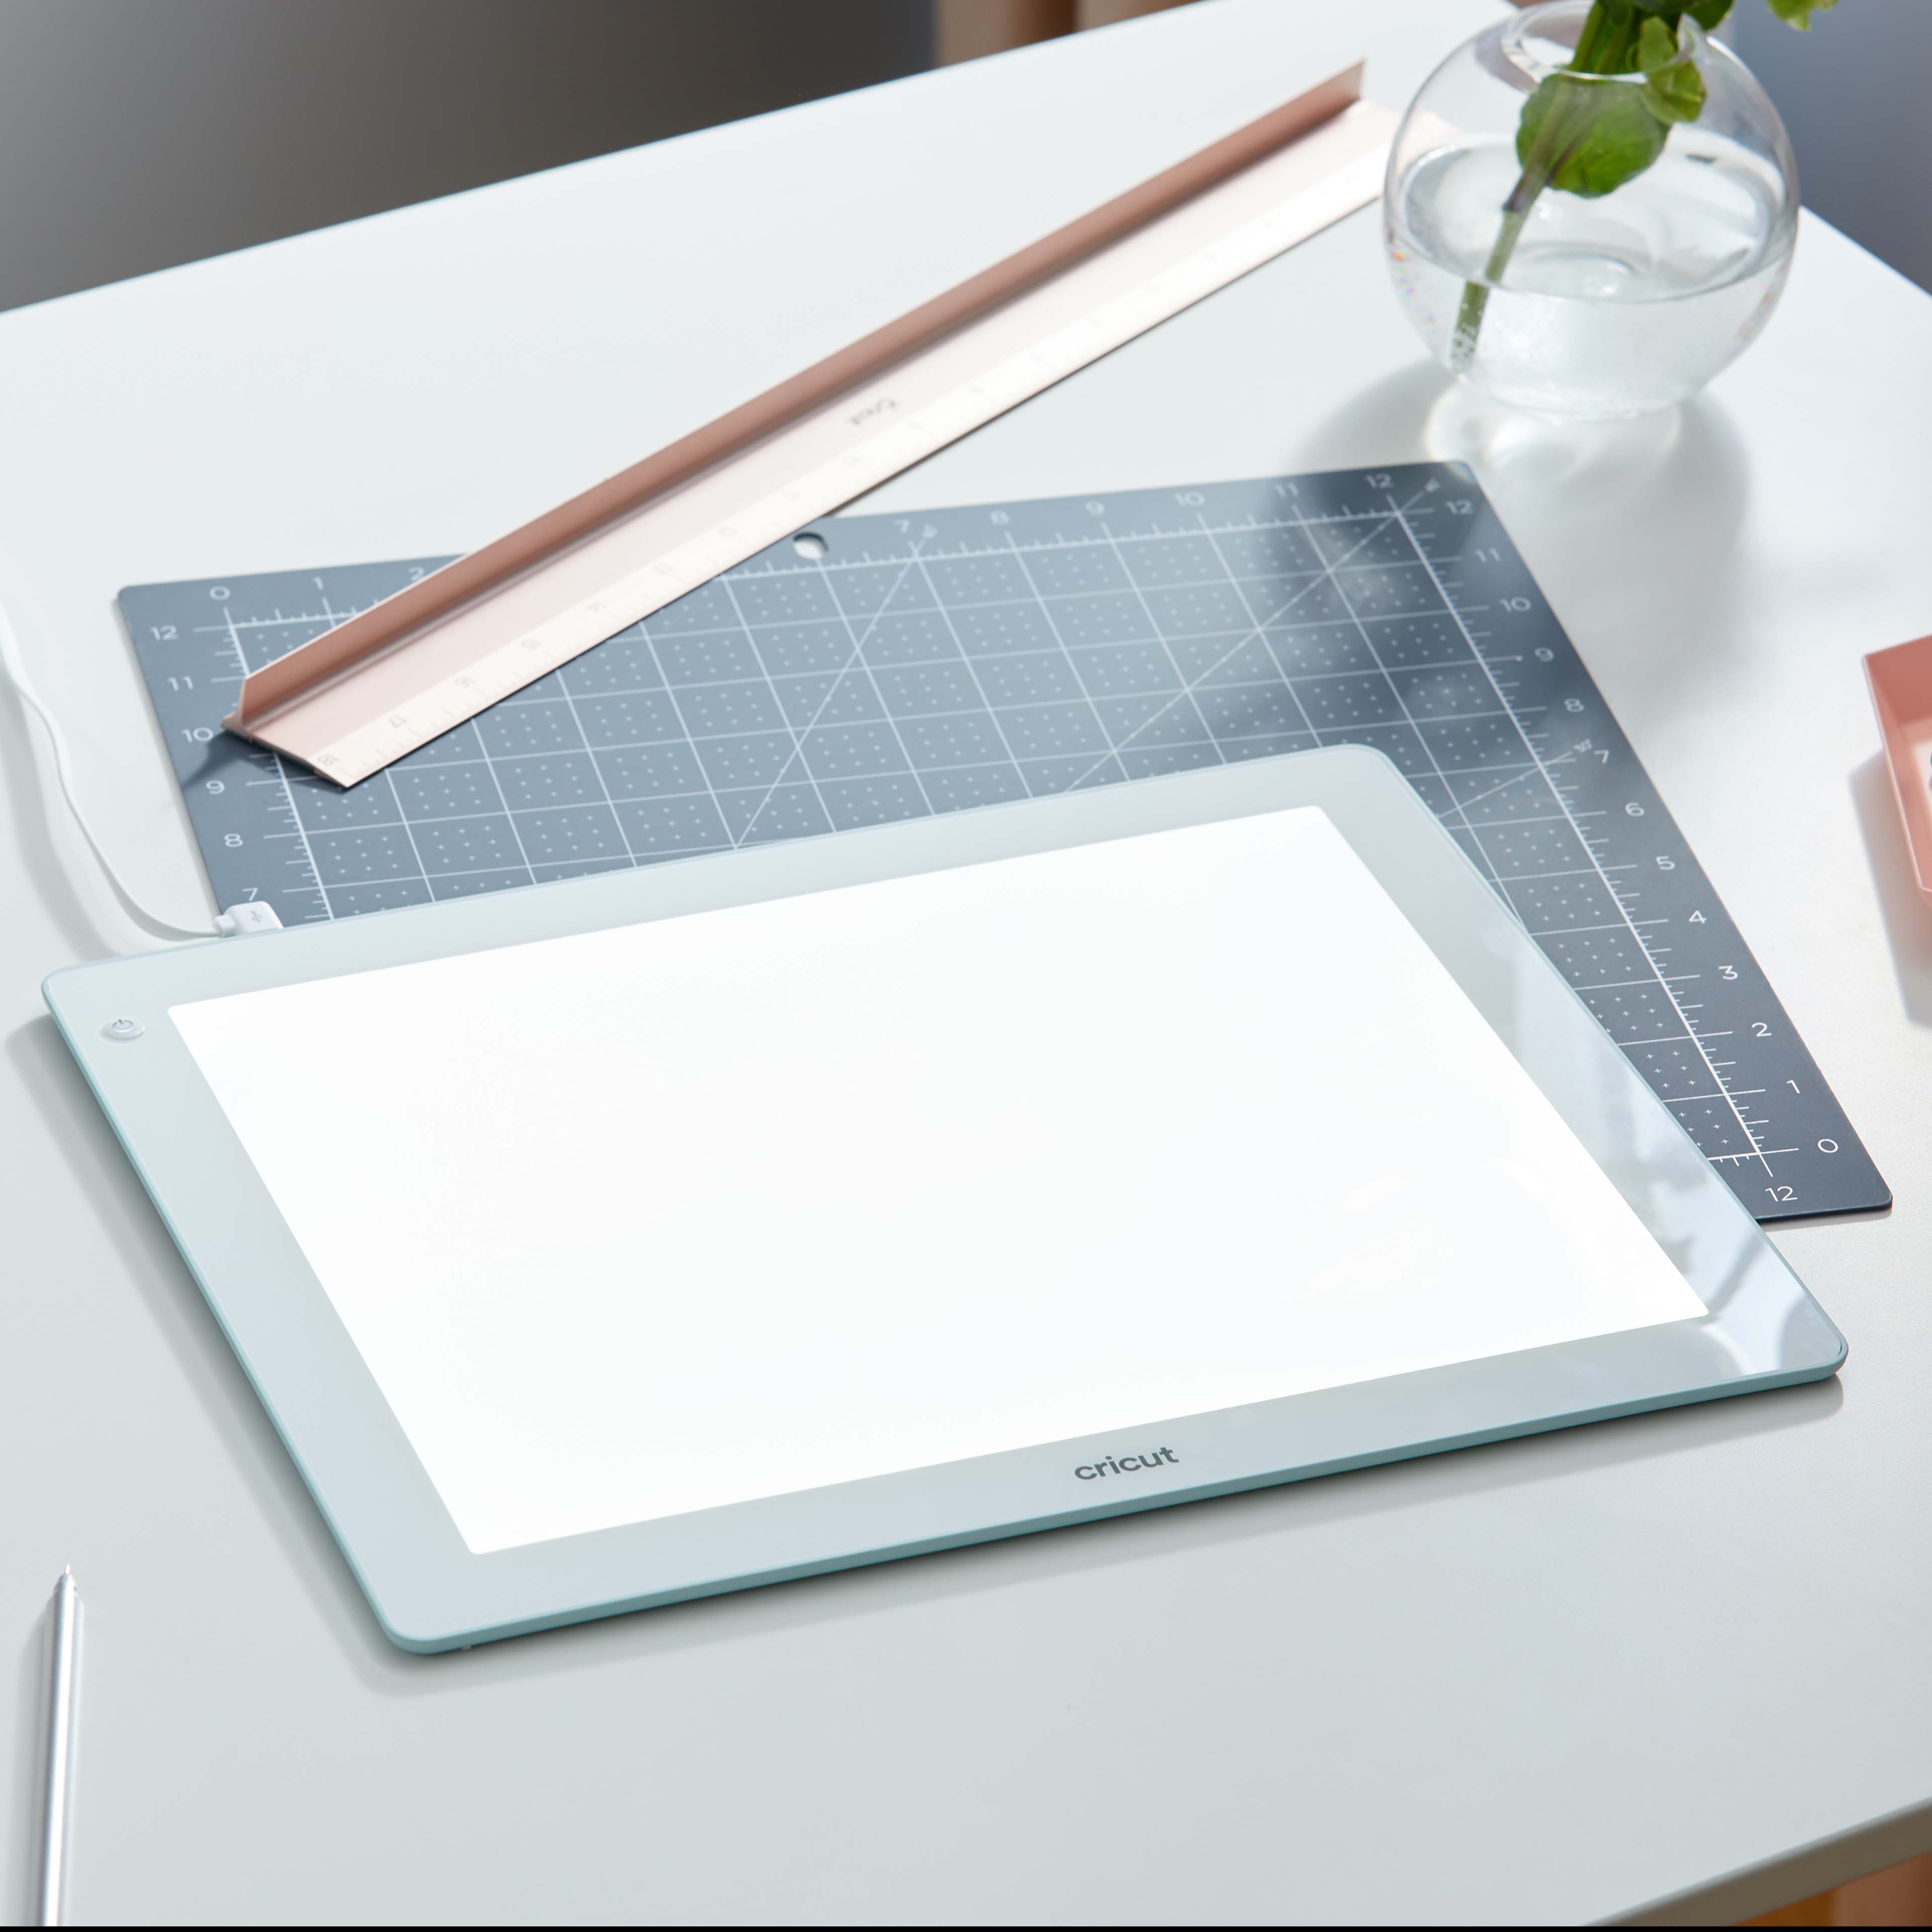 Is the Cricut BrightPad Worth the Cost? ⋆ The Quiet Grove